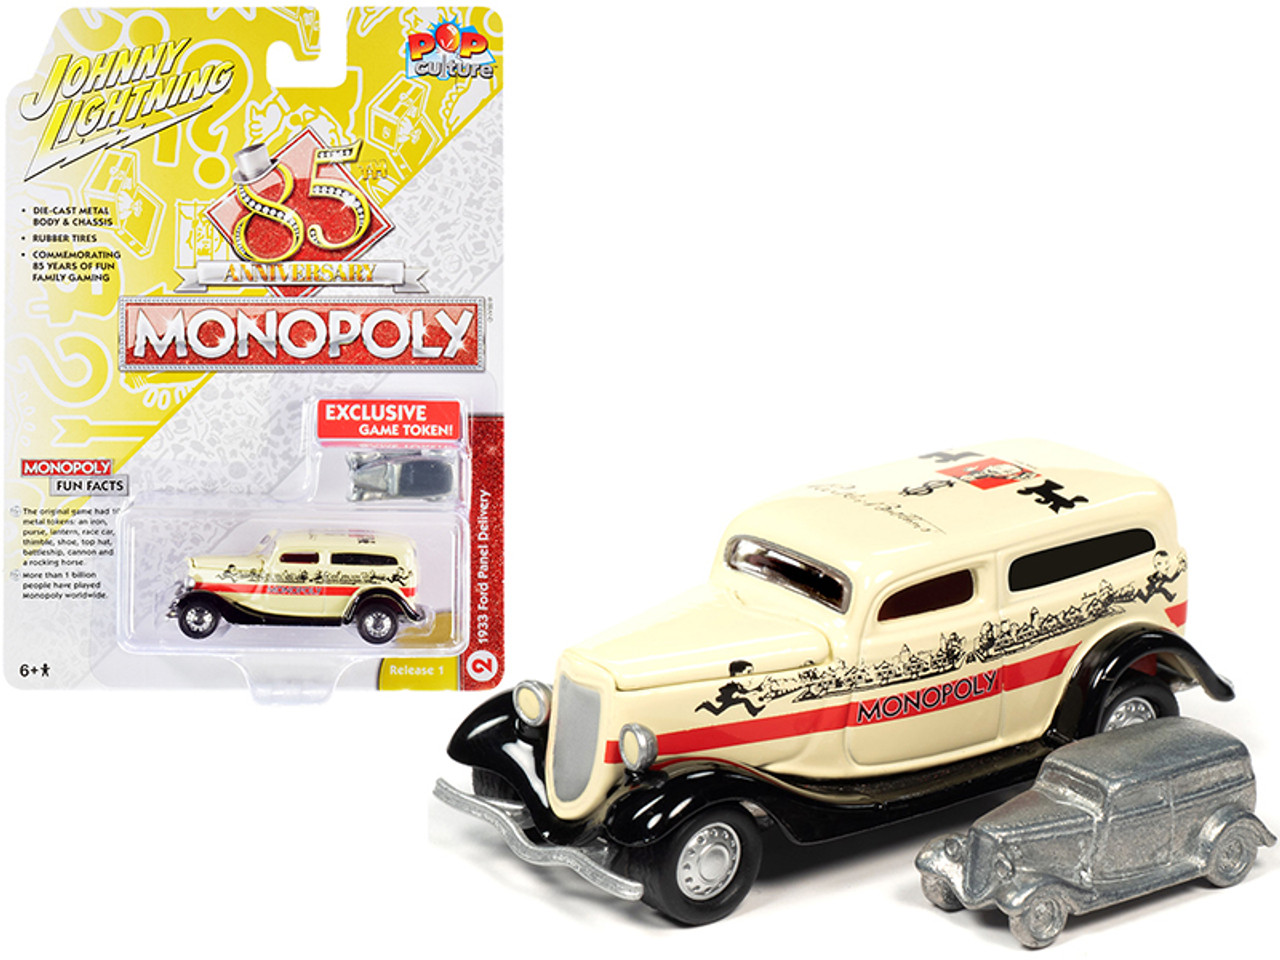 1933 Ford Panel Delivery Truck Yellow with Red Stripe and Game Token "Monopoly 85th Anniversary" "Pop Culture" Series 1/64 Diecast Model Car by Johnny Lightning